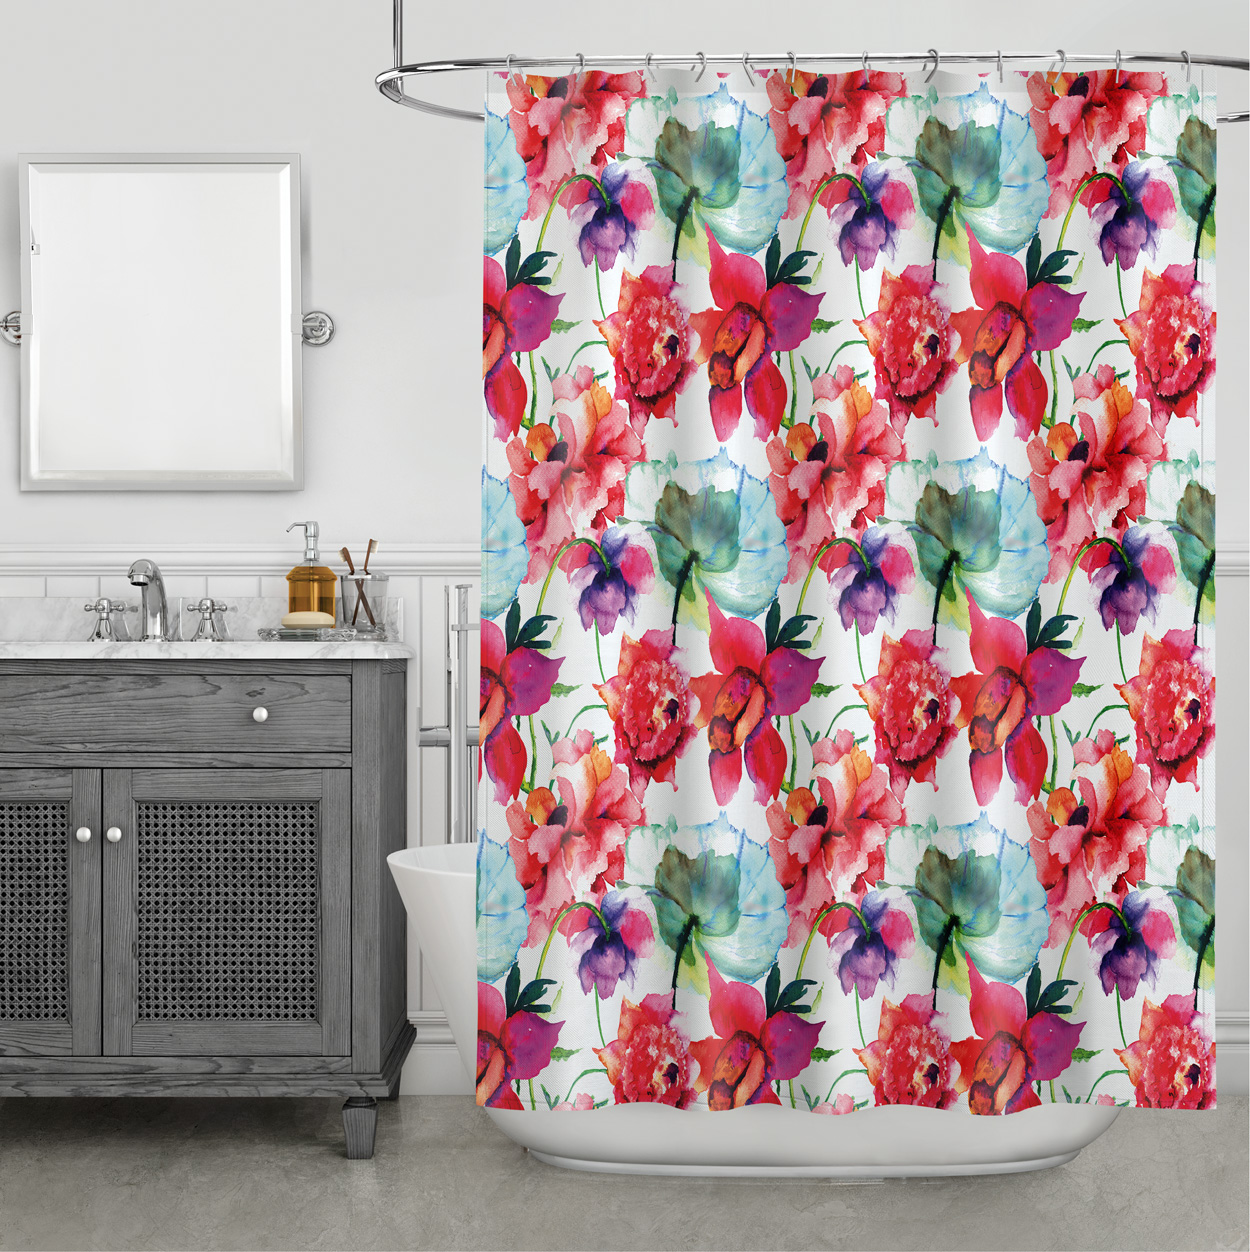 Splash Home Touch of Rose Polyester Fabric Shower Curtain 70 x 72 - Pink - image 1 of 8